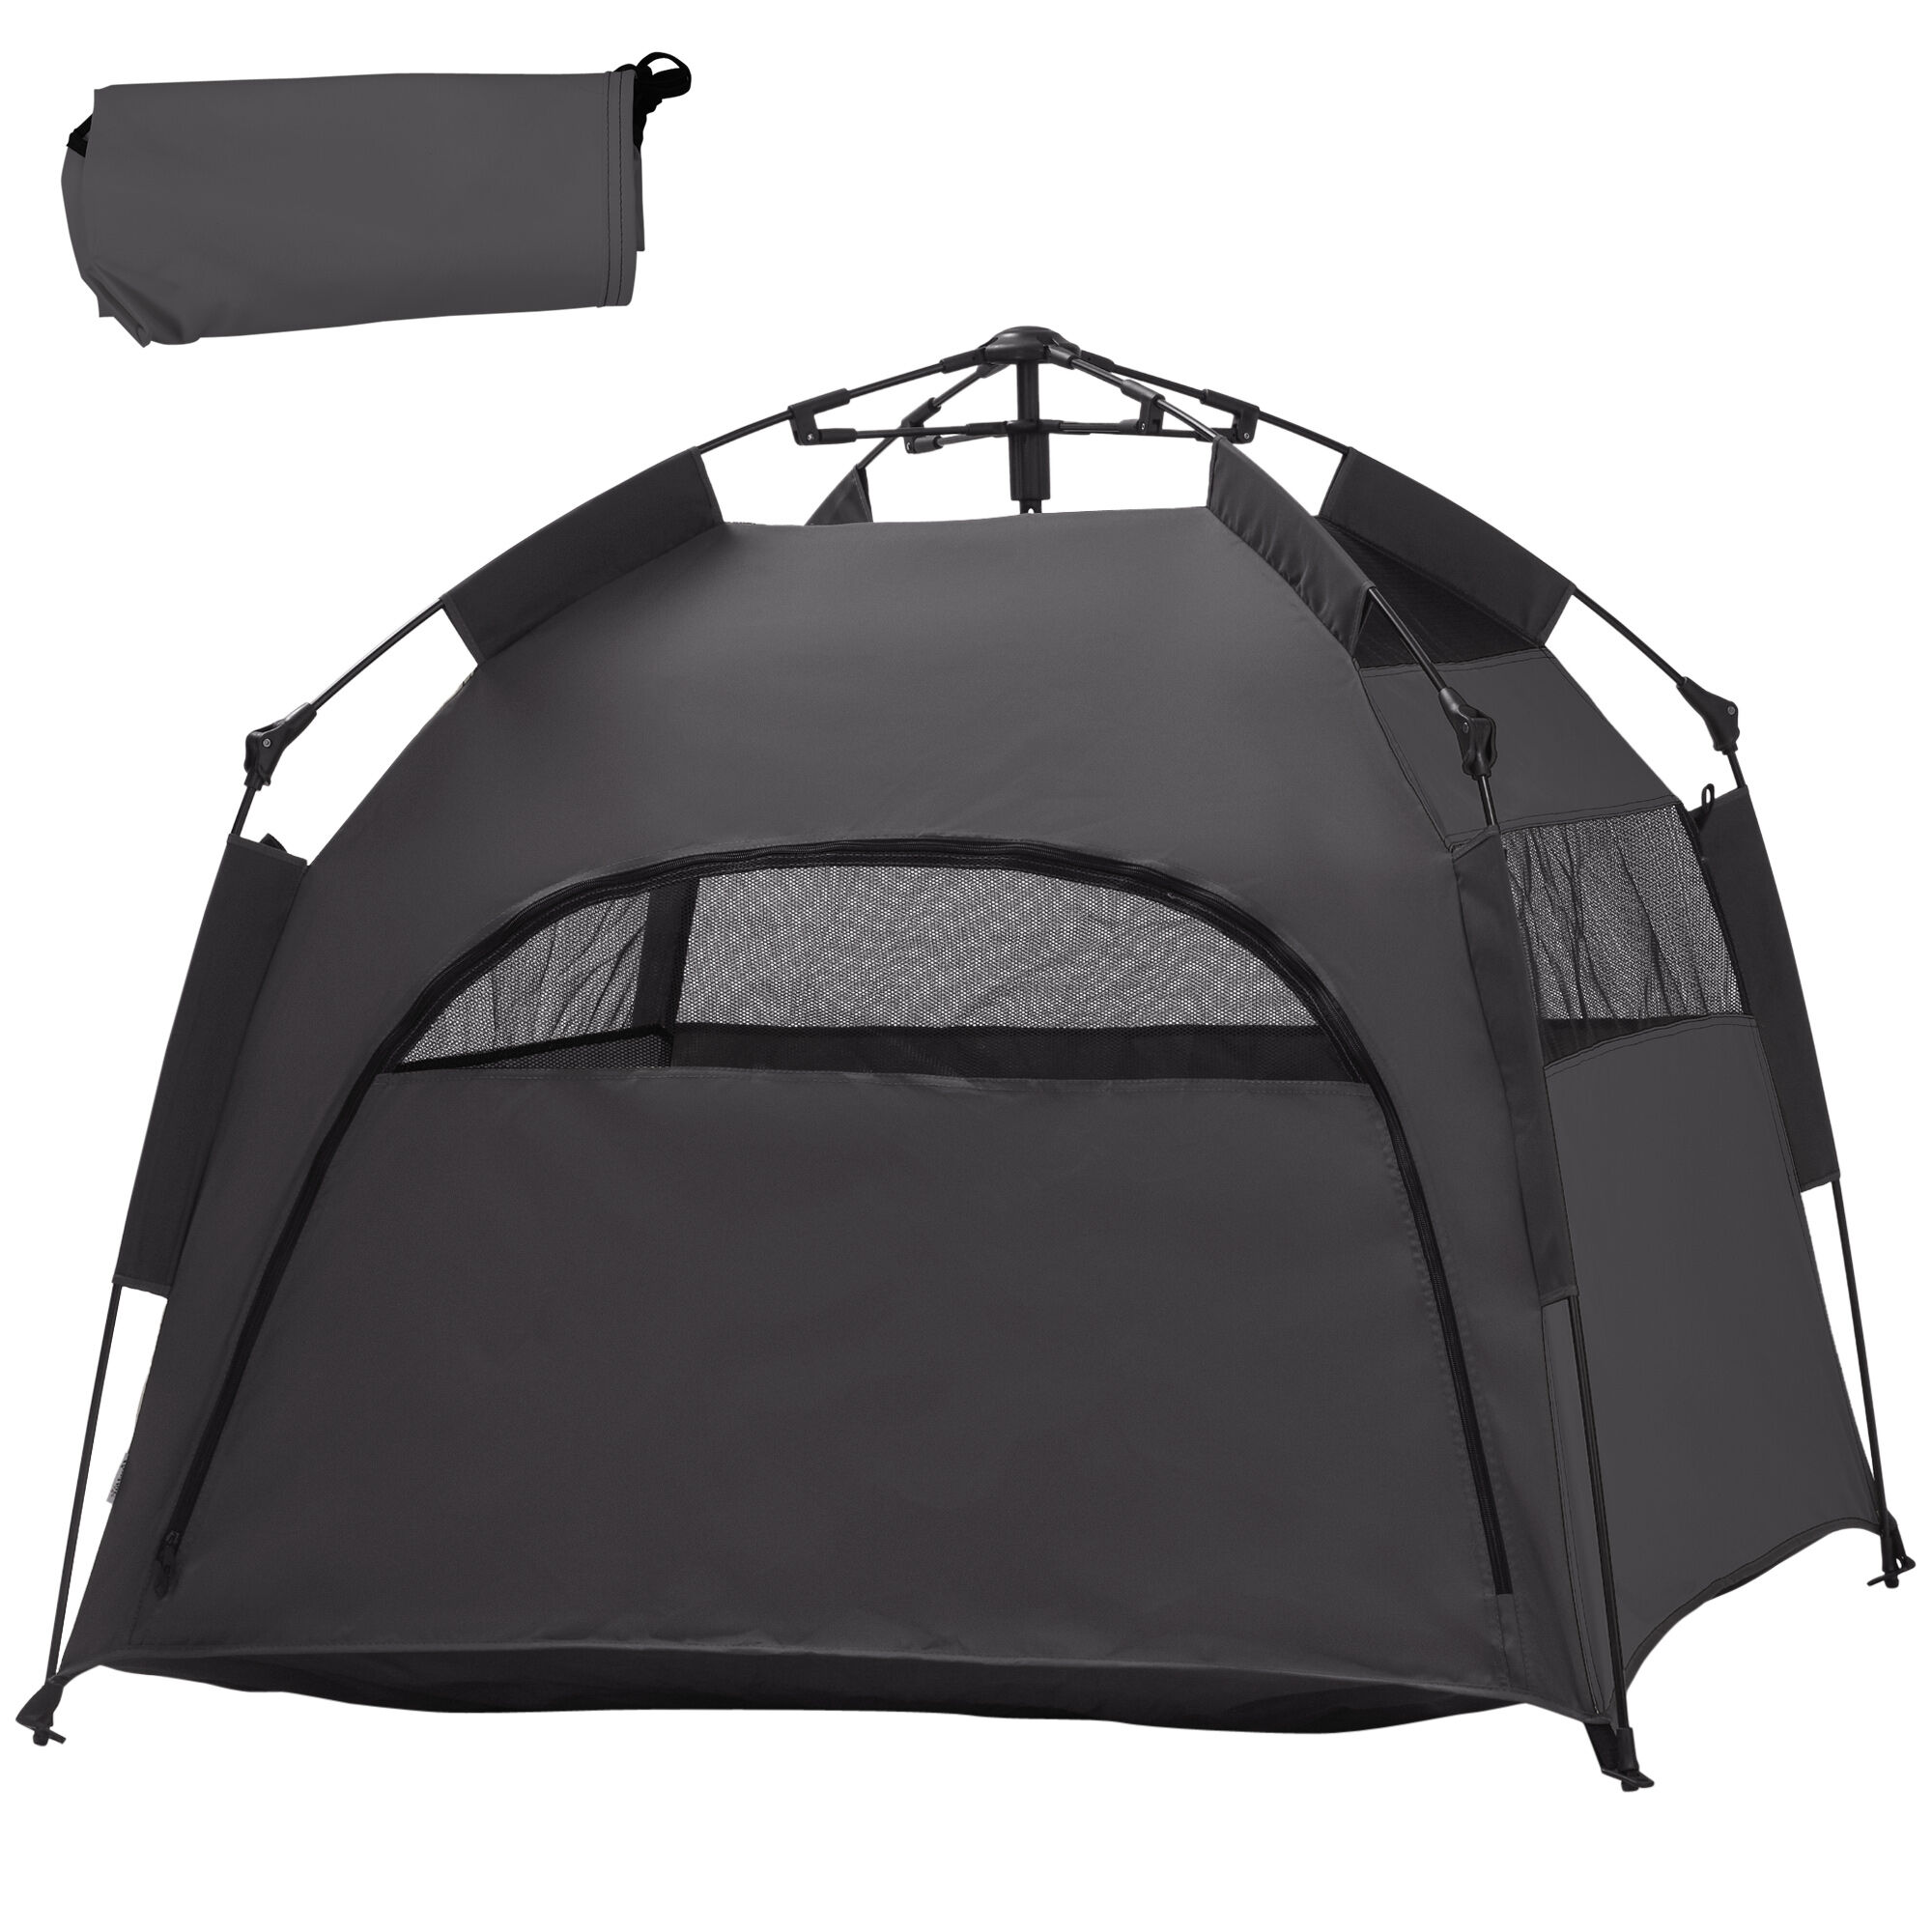 PawHut Pop Up Dog Tent for Extra Large and Large Dogs with Carry Bag, for Beach, Backyard, Home, Dark Gray